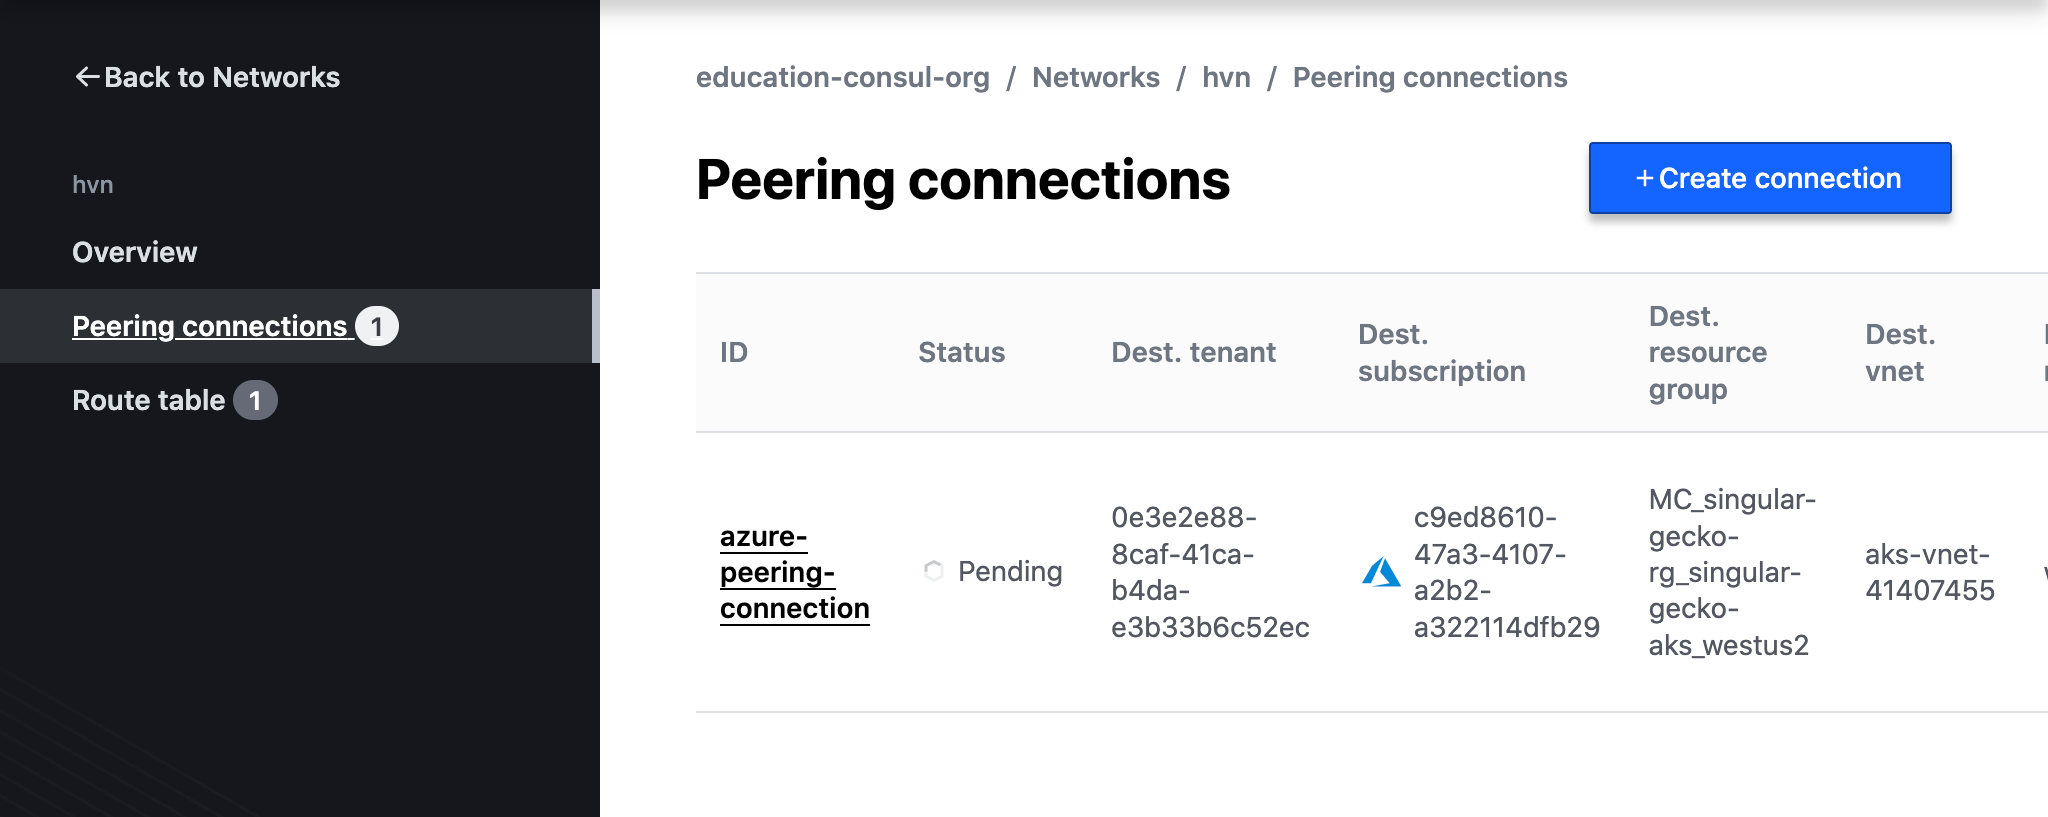 The "Peering connections" dashboard, with one pending peering connection named "azure-peering-connection"